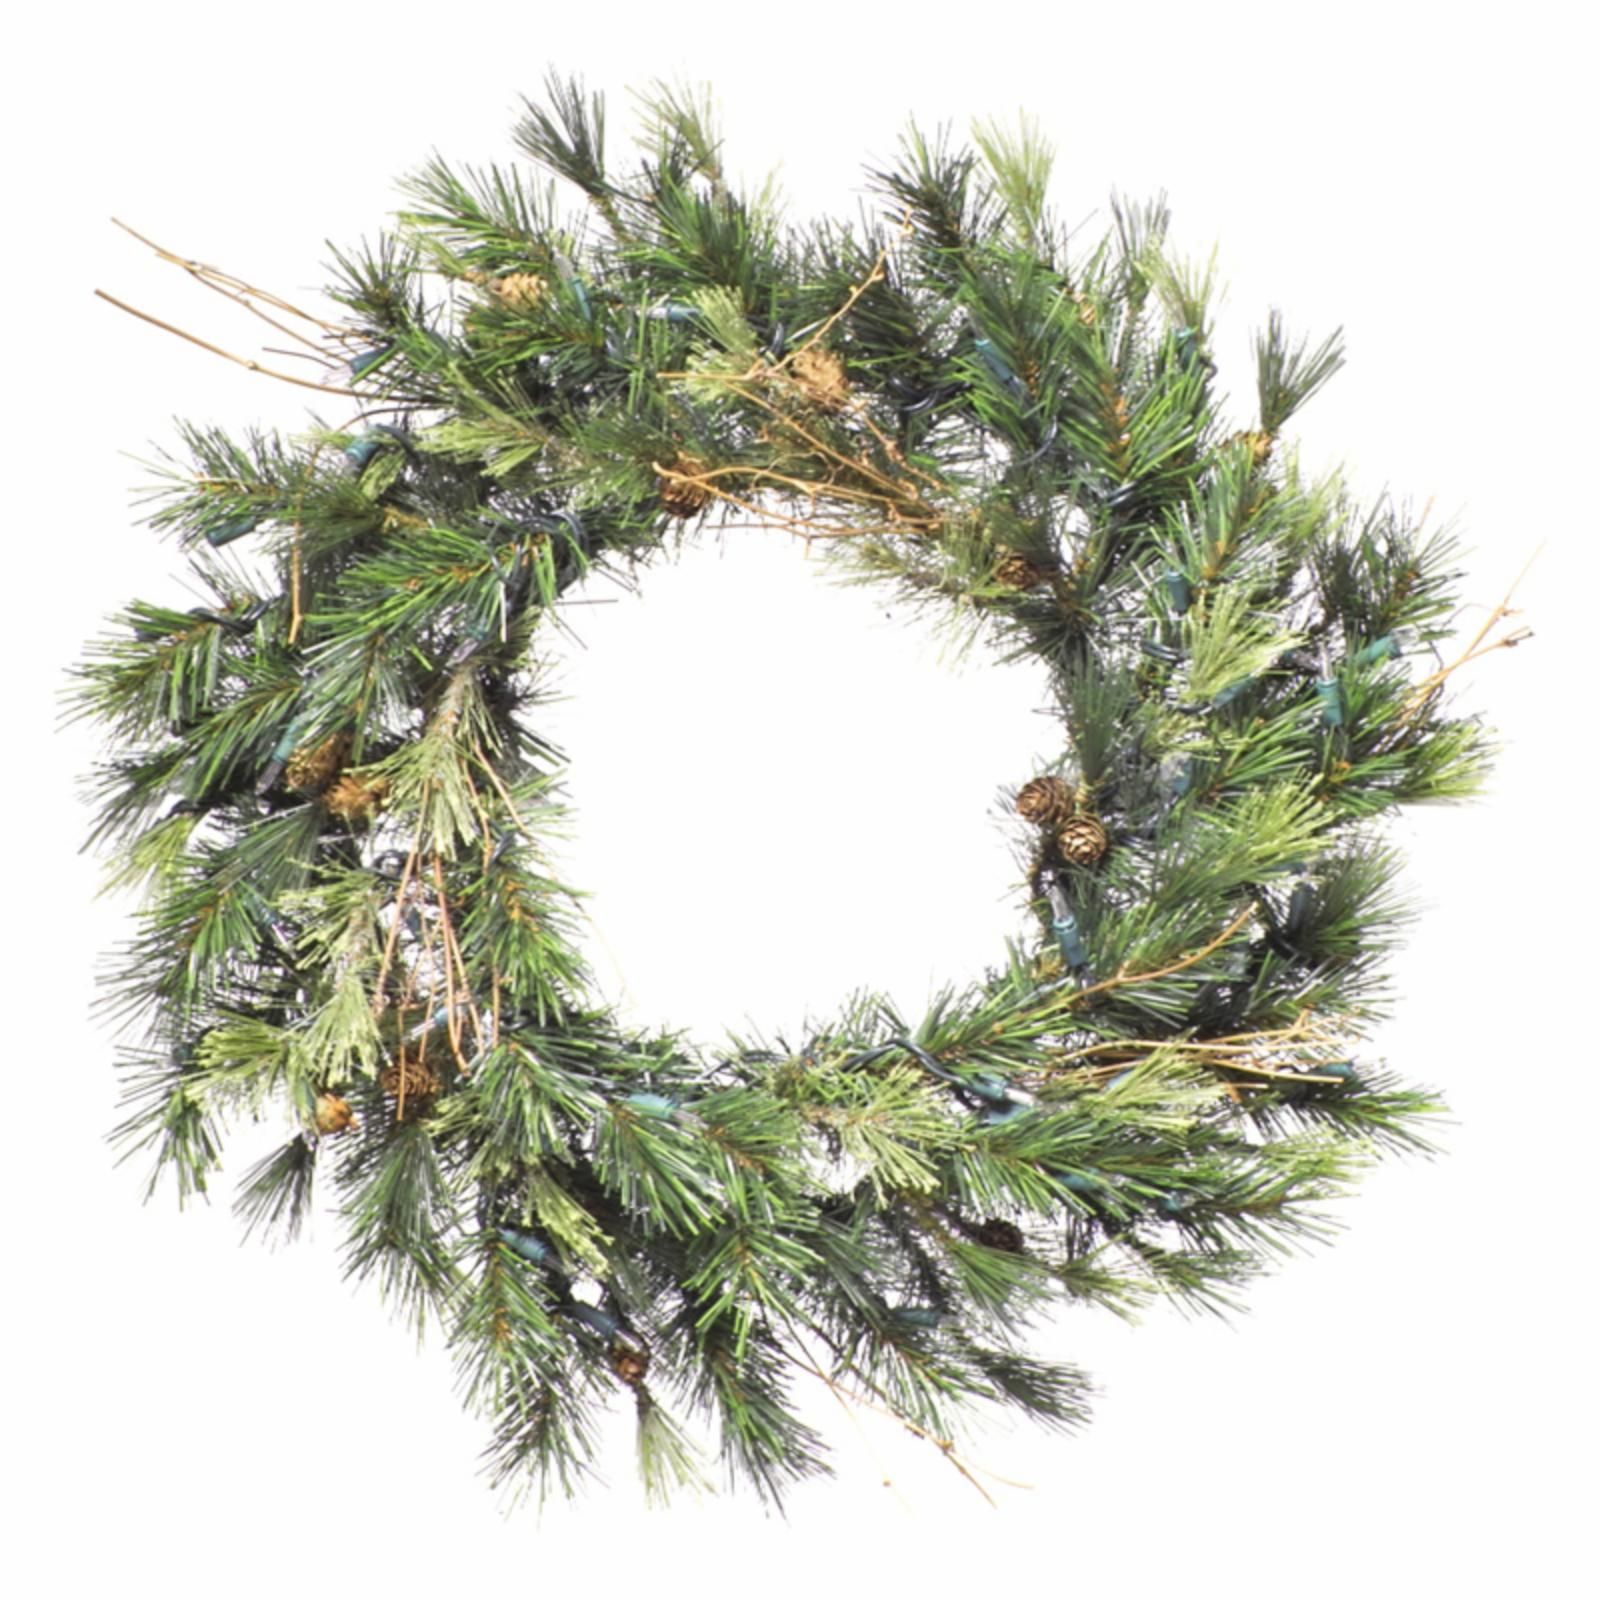 16 in. Mixed Country Prelit Wreath | Hayneedle